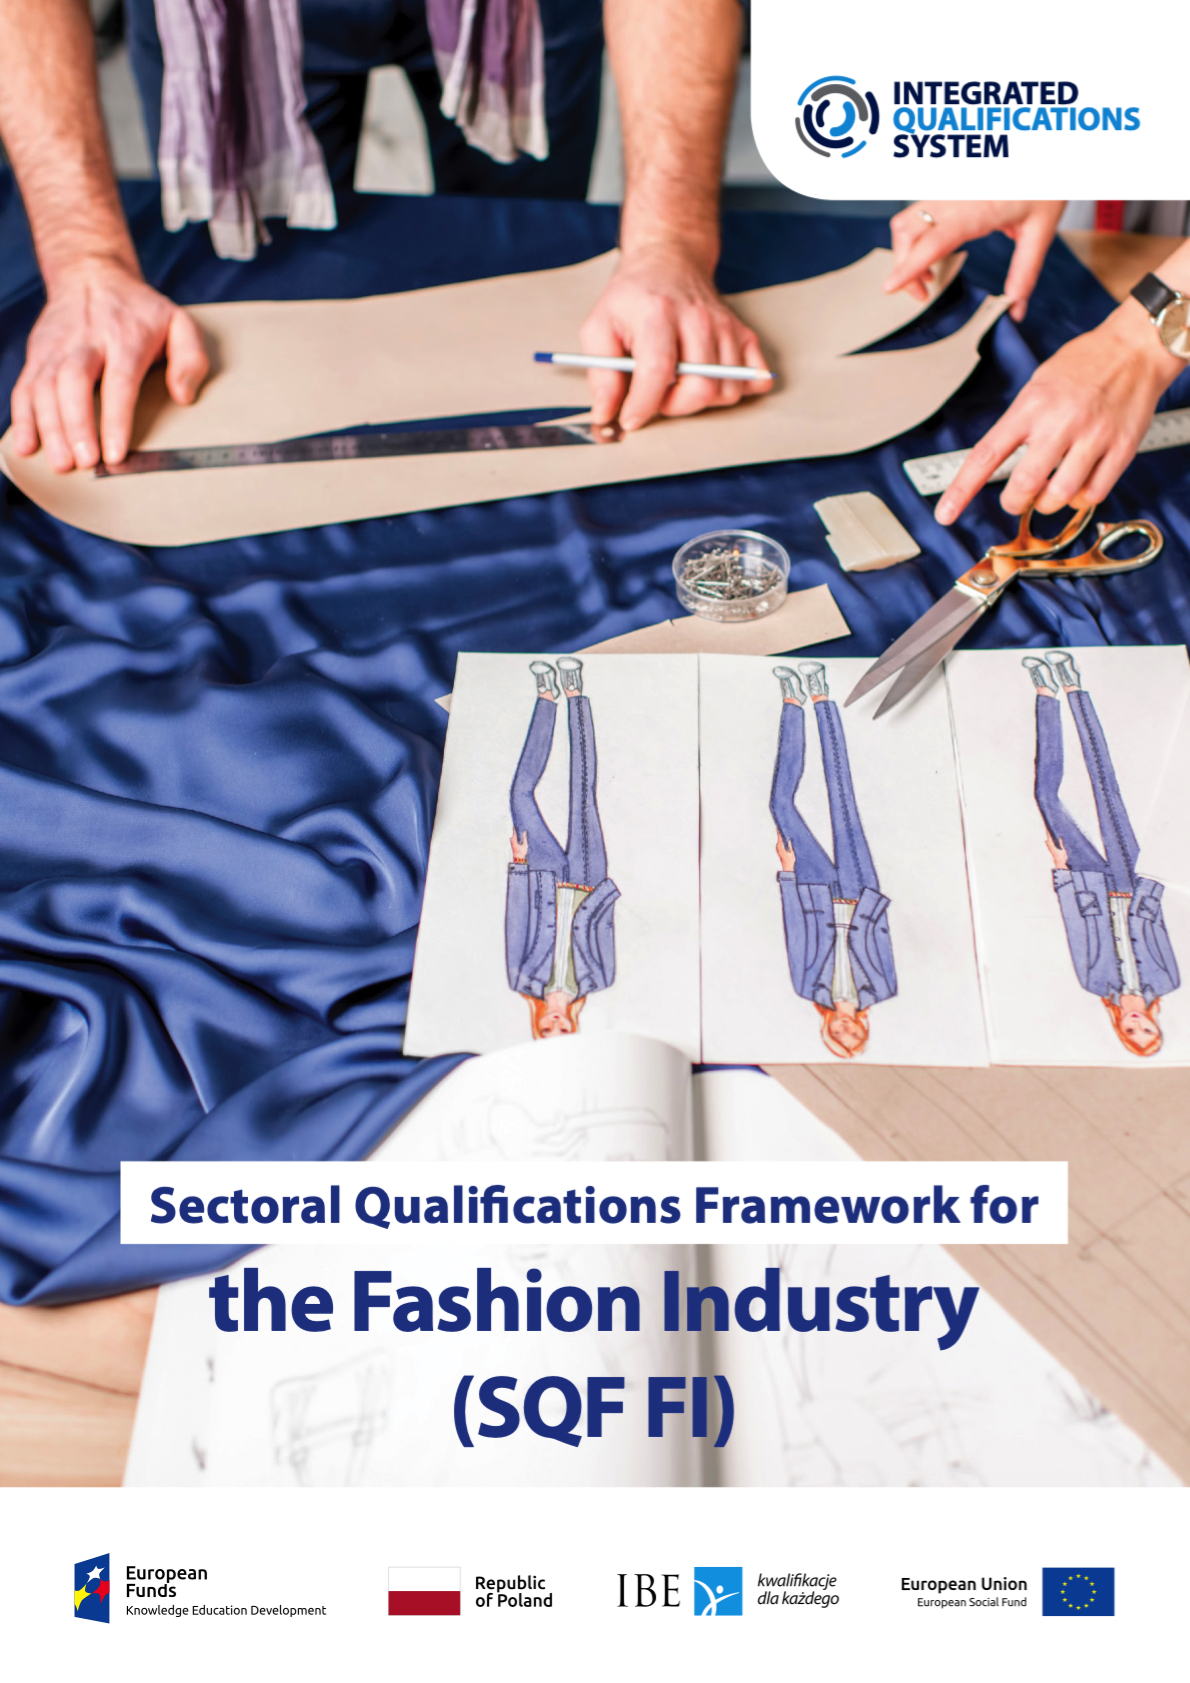 Sectoral Qualifications Framework for the Fashion Industry (SQF FI)